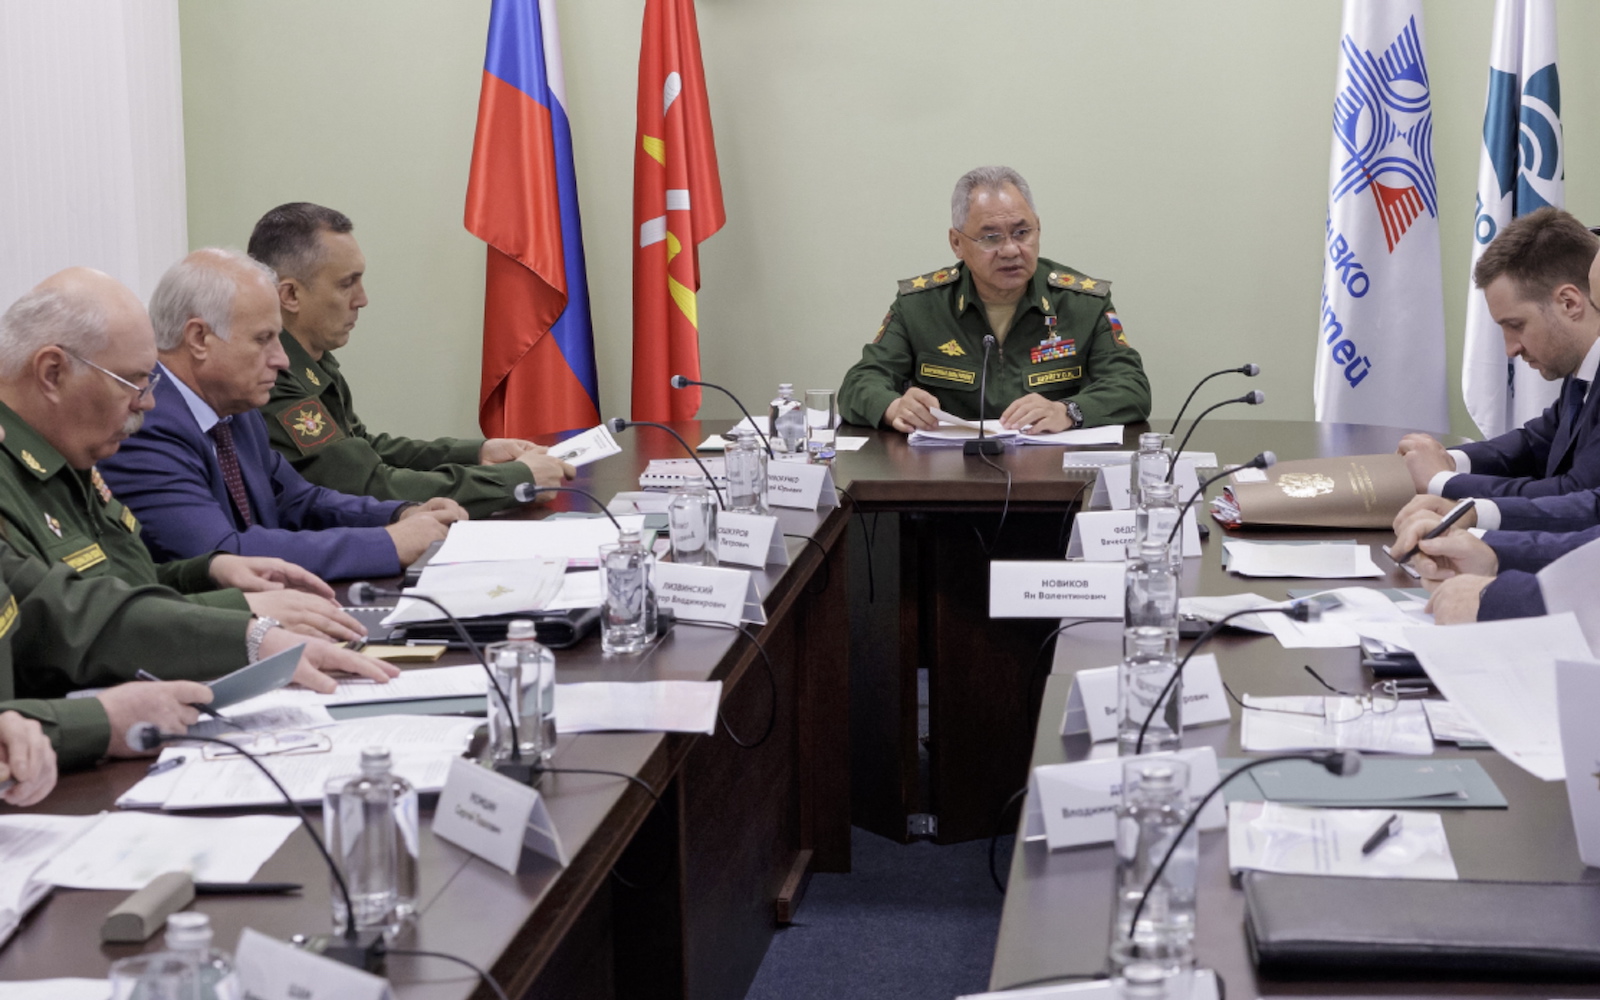 epa10828902 A handout picture provided by the Russian Defence ministry press-service shows Russian Defence Minister General of the Army Sergei Shoigu (C) attending a meeting inspecting the military enterprise â€˜Concern VKOâ€™ Almaz-Antey in Tula, Russia, 30 August 2023. The Ministry of Defense reported that Shoigu on Wednesday checked the progress of the state defense order at defense enterprises in the Tula region, including inspecting the production shops of an enterprise that produces radar systems, which is part of Almaz-Antey. Sergei Shoigu instructed to increase the production and repair of radar detection equipment used during the military operation in Ukraine and demanded that the management of the concern organize round-the-clock work of the enterprise, the Russian Defense Ministry reported 24/7.  EPA/RUSSIAN DEFENCE MINISTRY PRESS SERVICE/HANDOUT HANDOUT HANDOUT EDITORIAL USE ONLY/NO SALES HANDOUT EDITORIAL USE ONLY/NO SALES